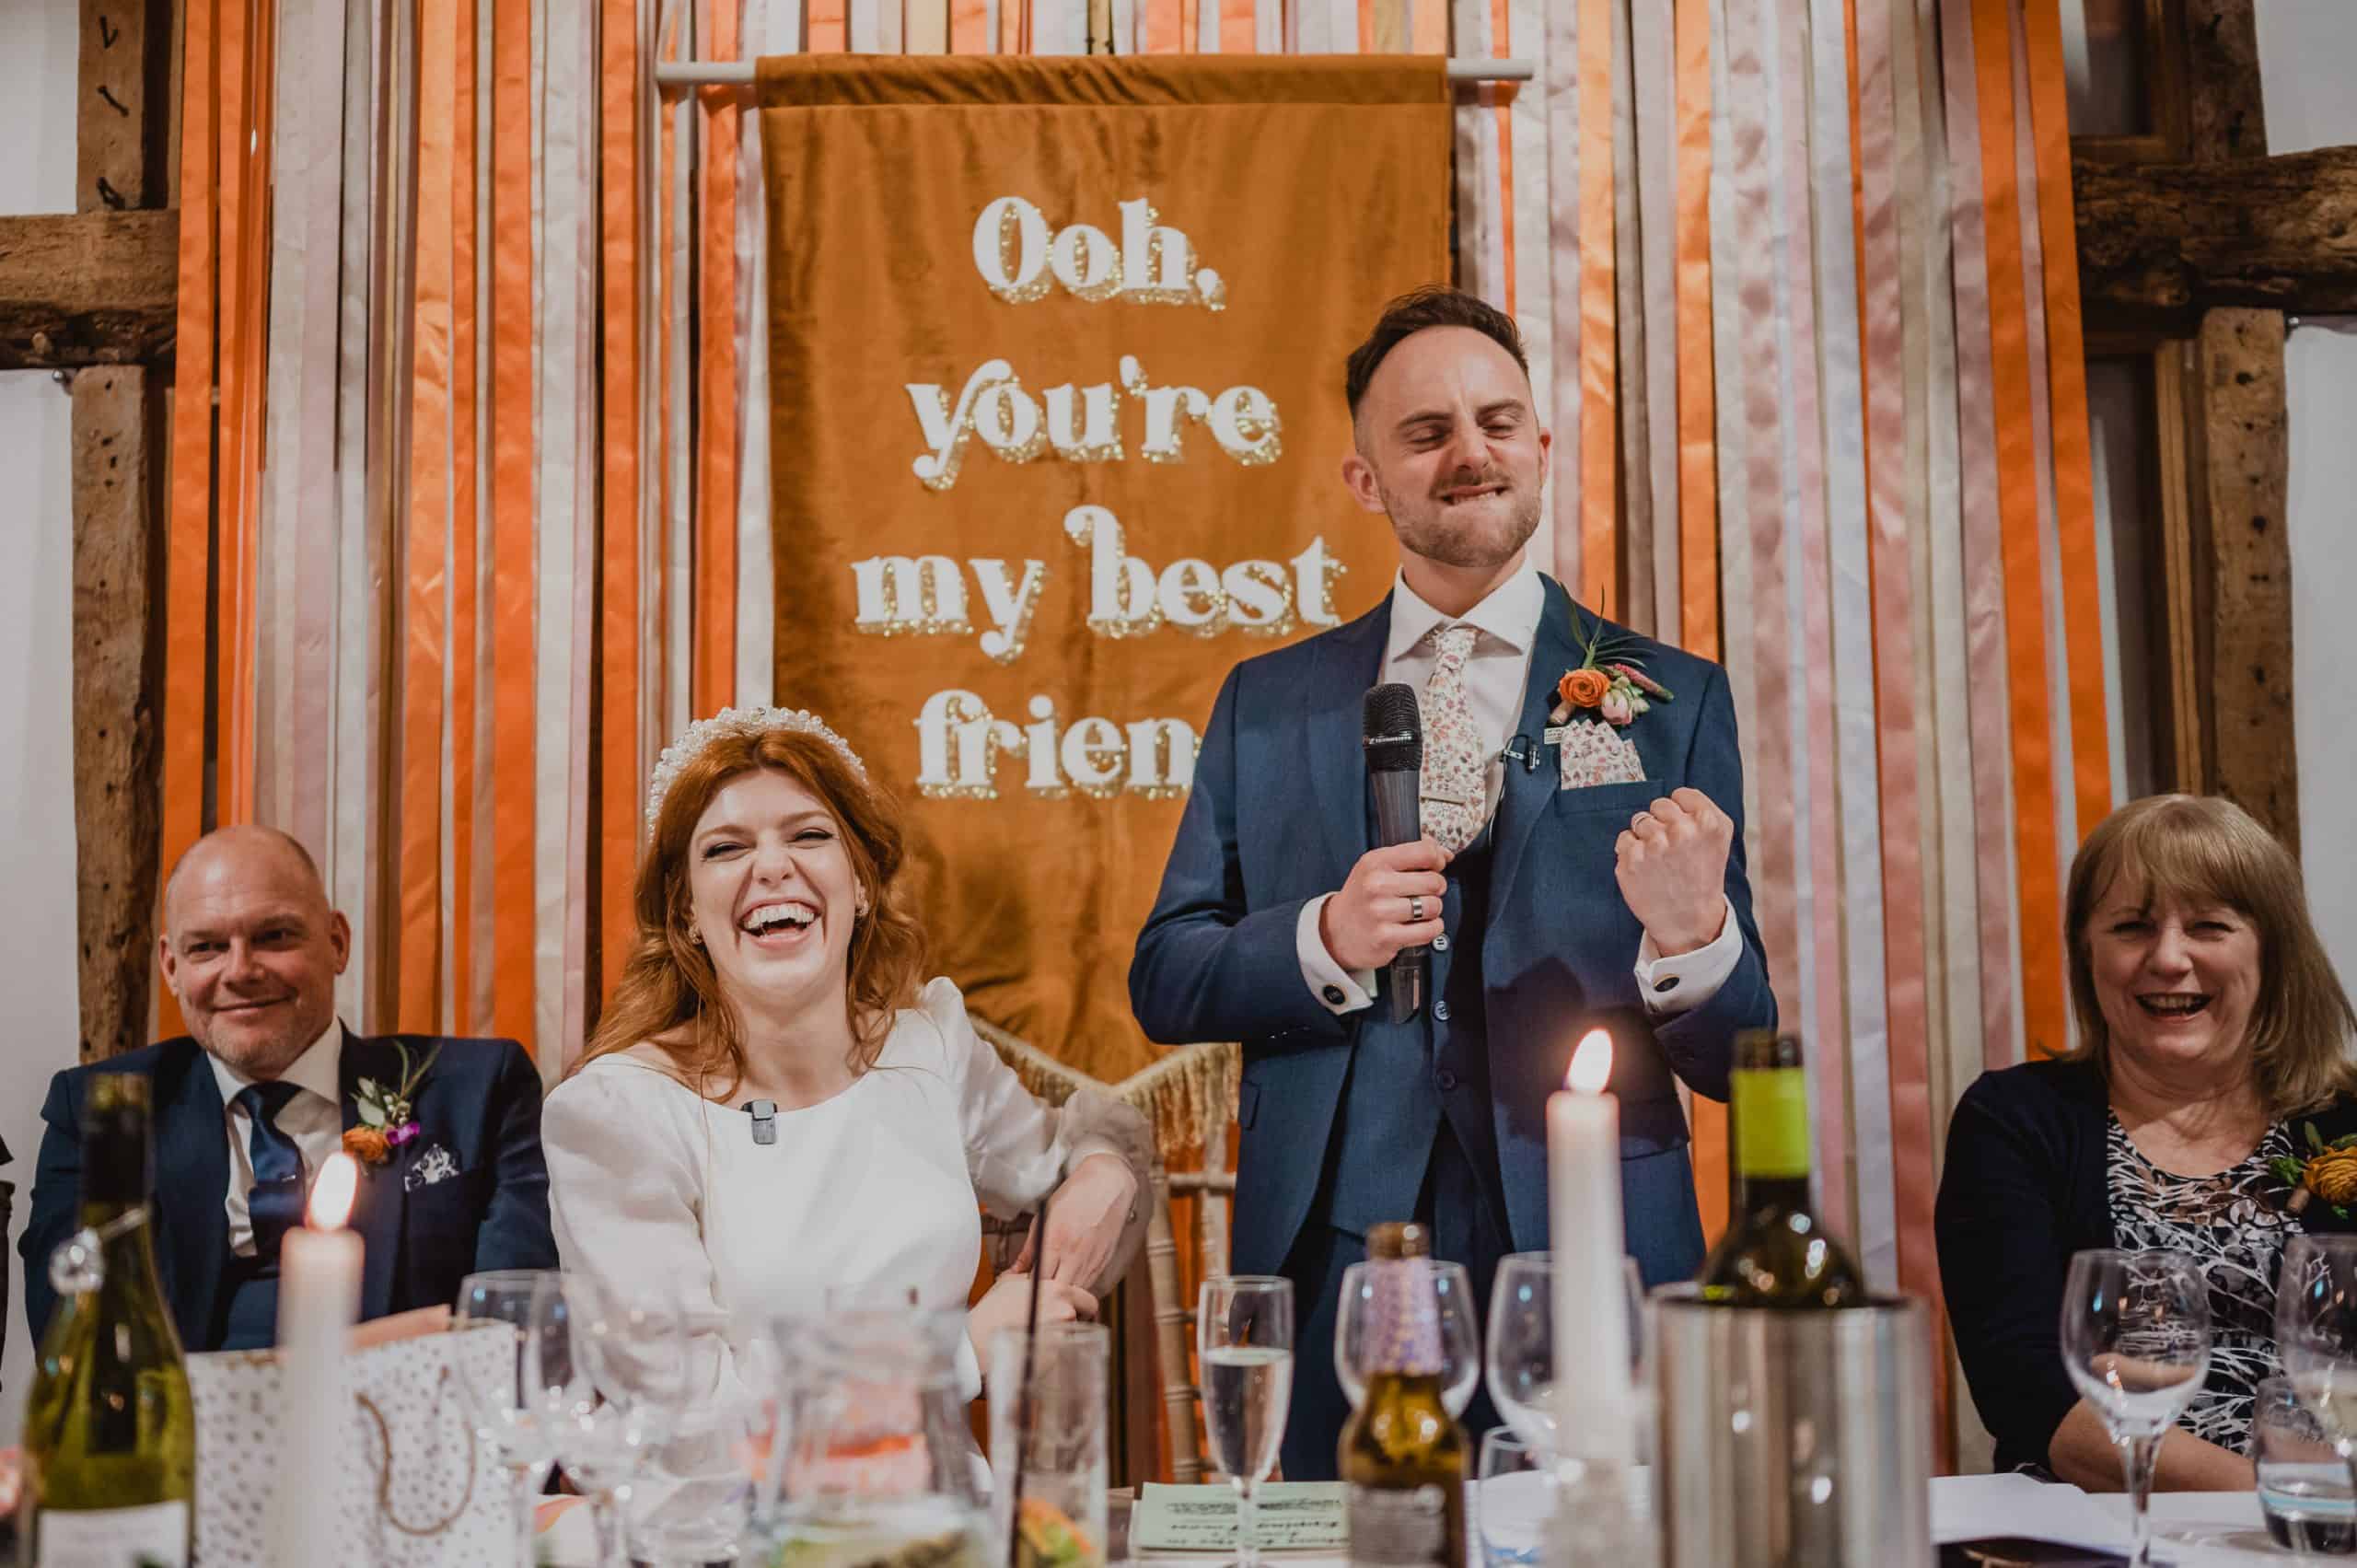 A groom celebrates making his bride laugh during the speeches